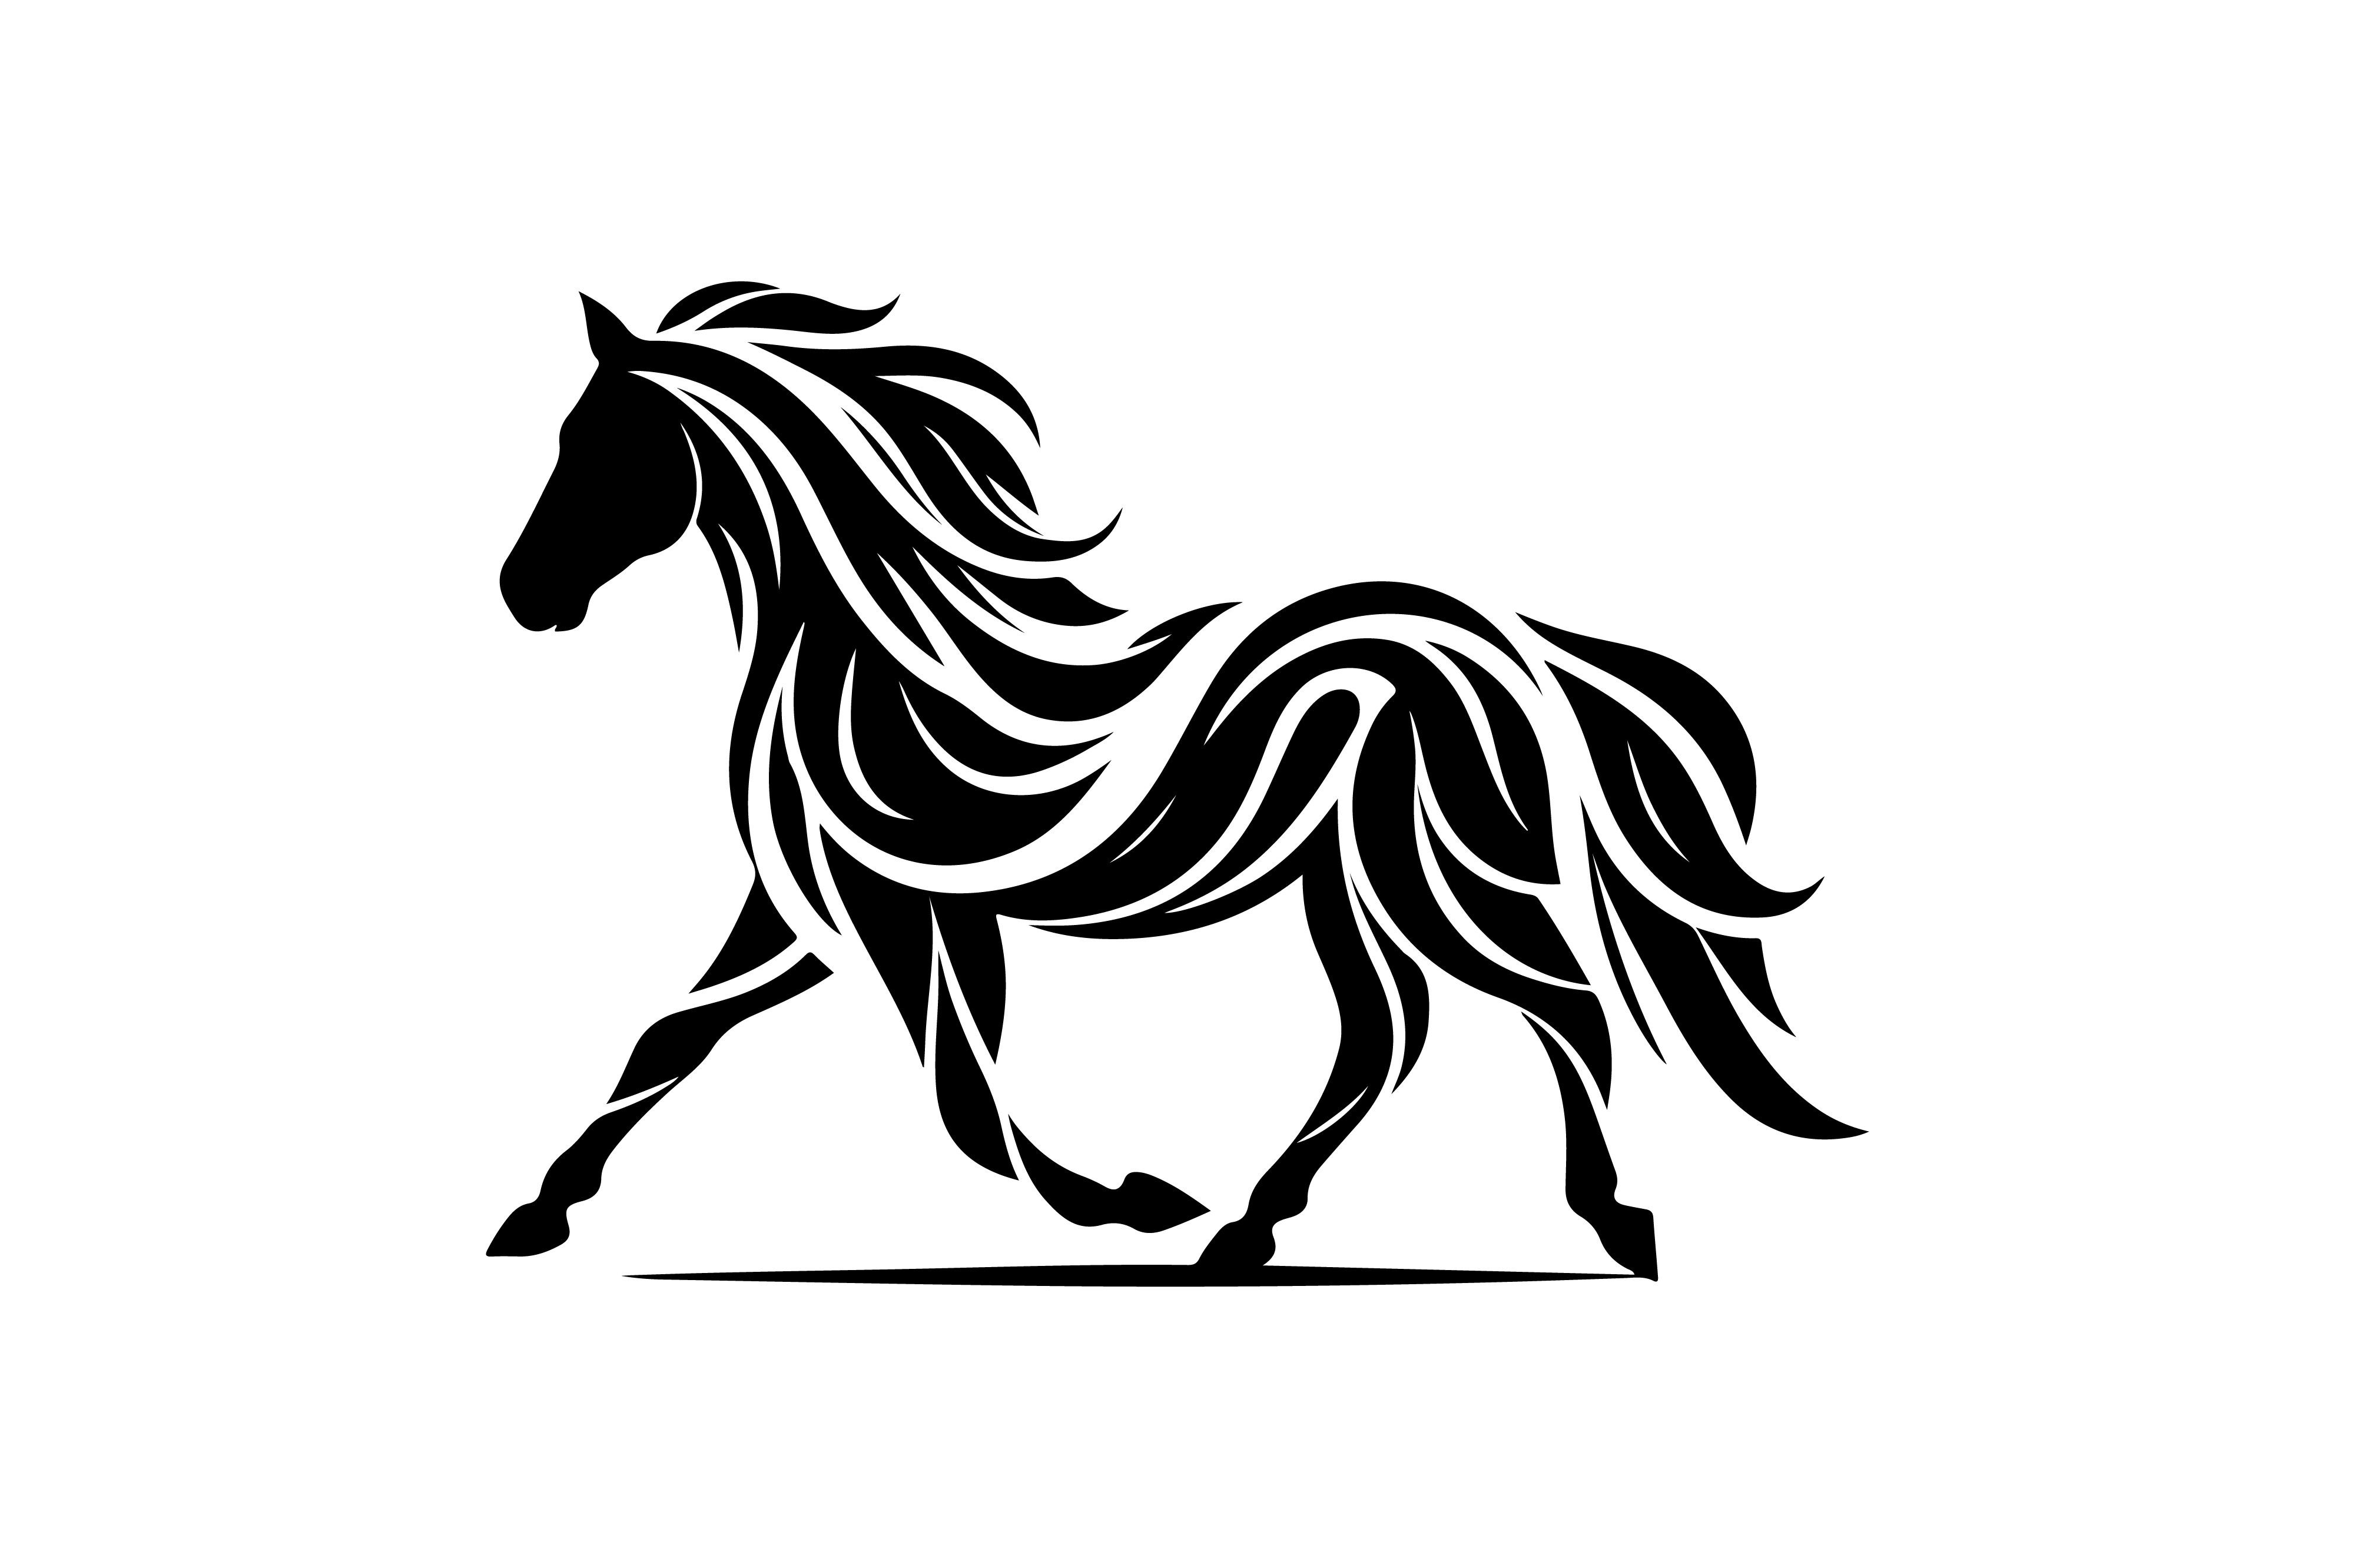 Horse Silhouette Vector Illustration Graphic by Creative Designs